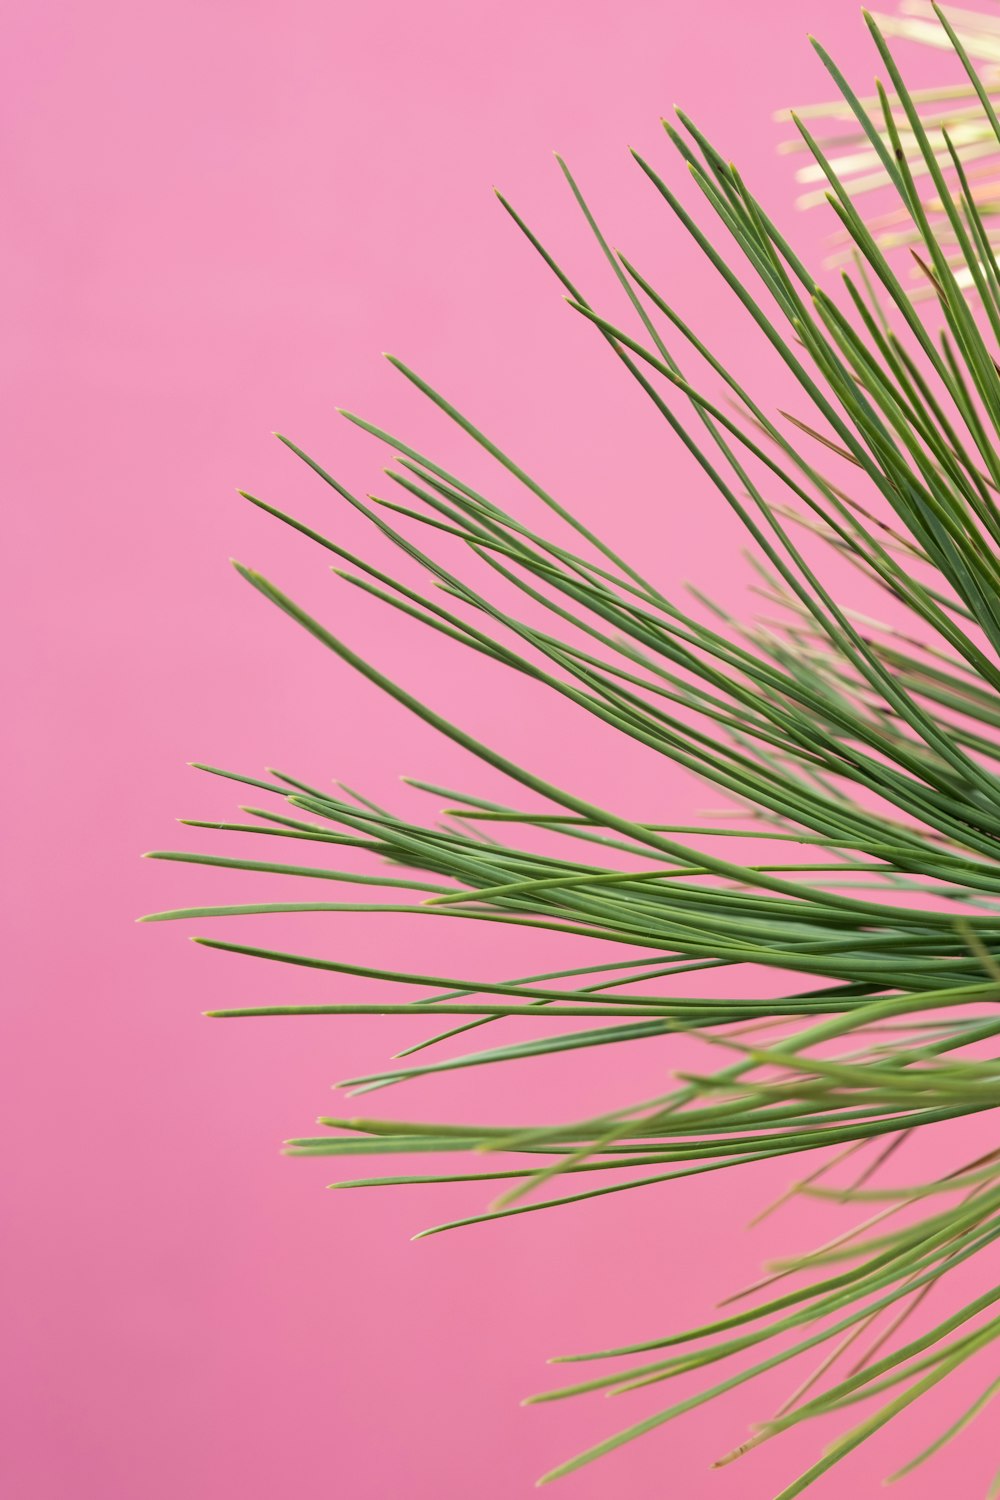 green-leafed plant on pink background